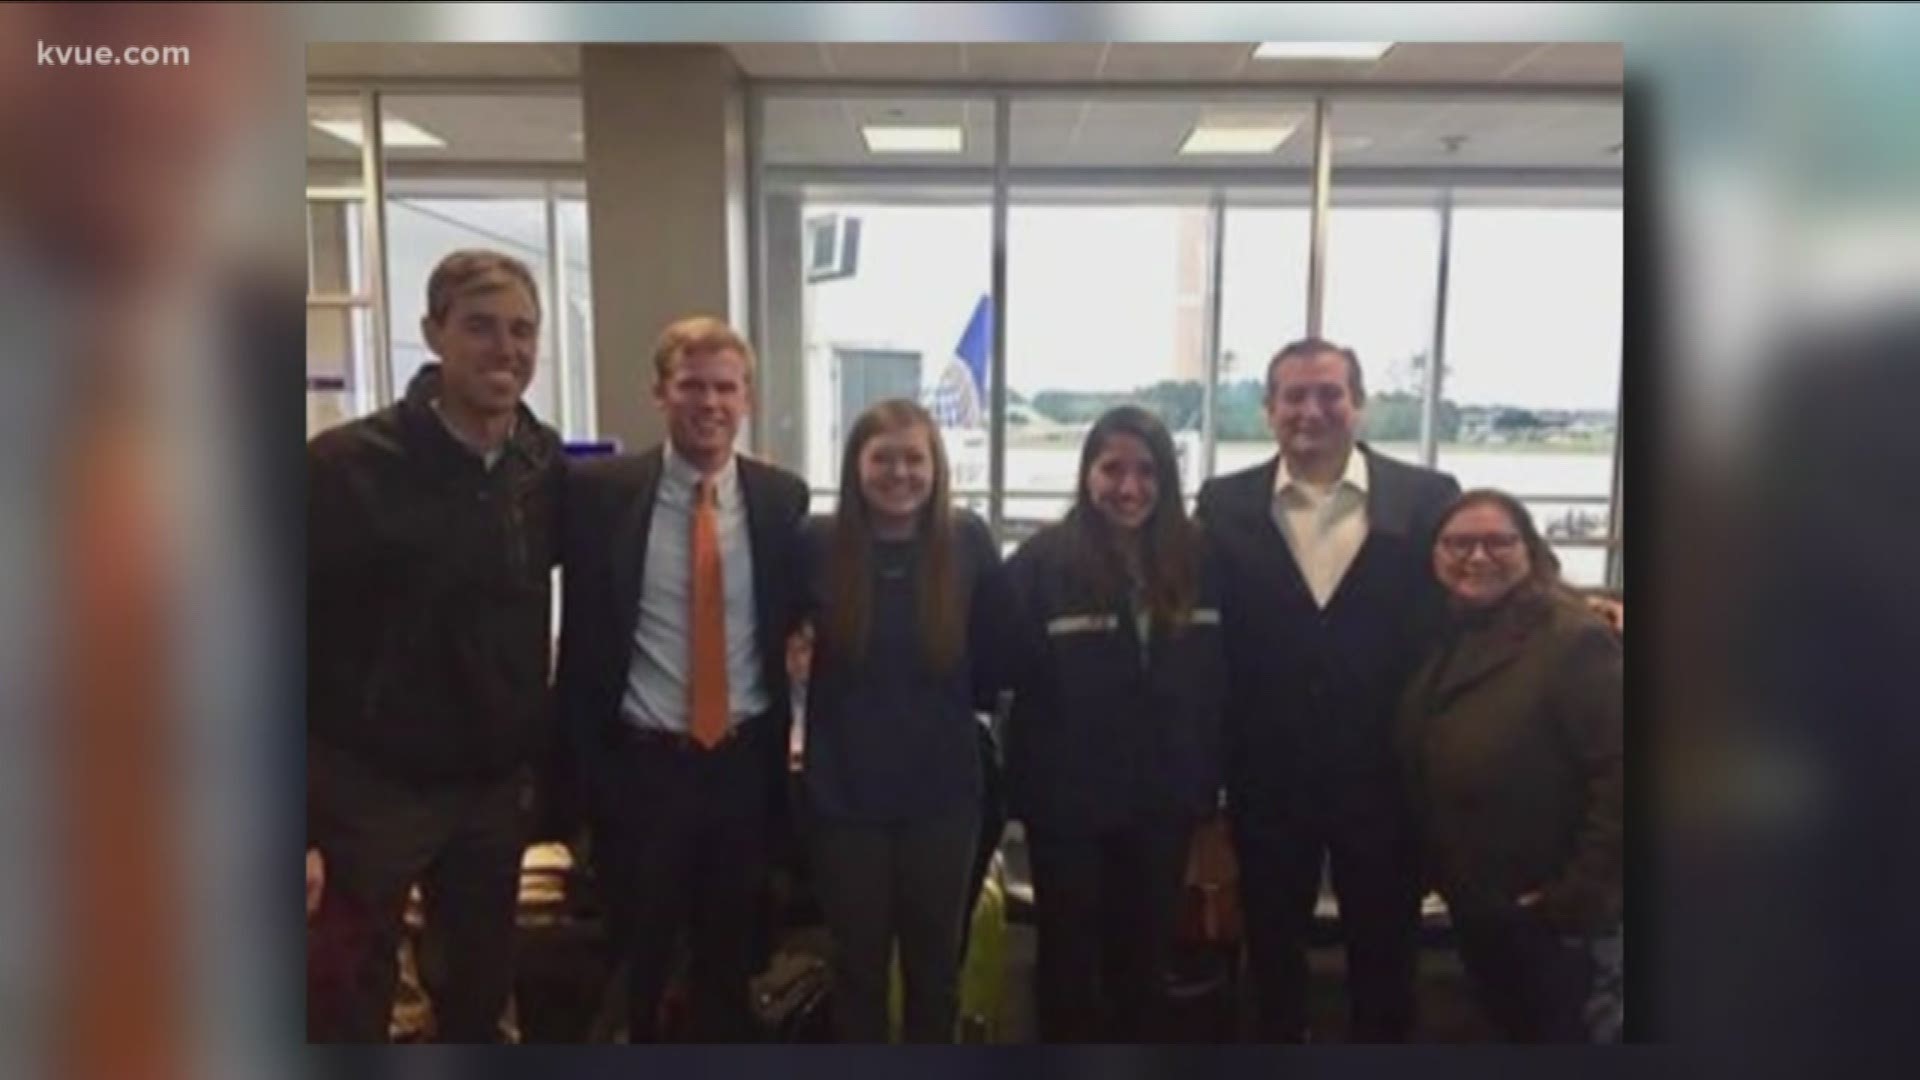 What a small world.
Just weeks after midterm elections, U.S. Rep. Beto O'Rourke and Sen. Ted Cruz were captured meeting for the first time since Election Day at a Houston airport.
STORY: http://www.kvue.com/news/local/beto-o-rourke-ted-cruz-meet-for-first